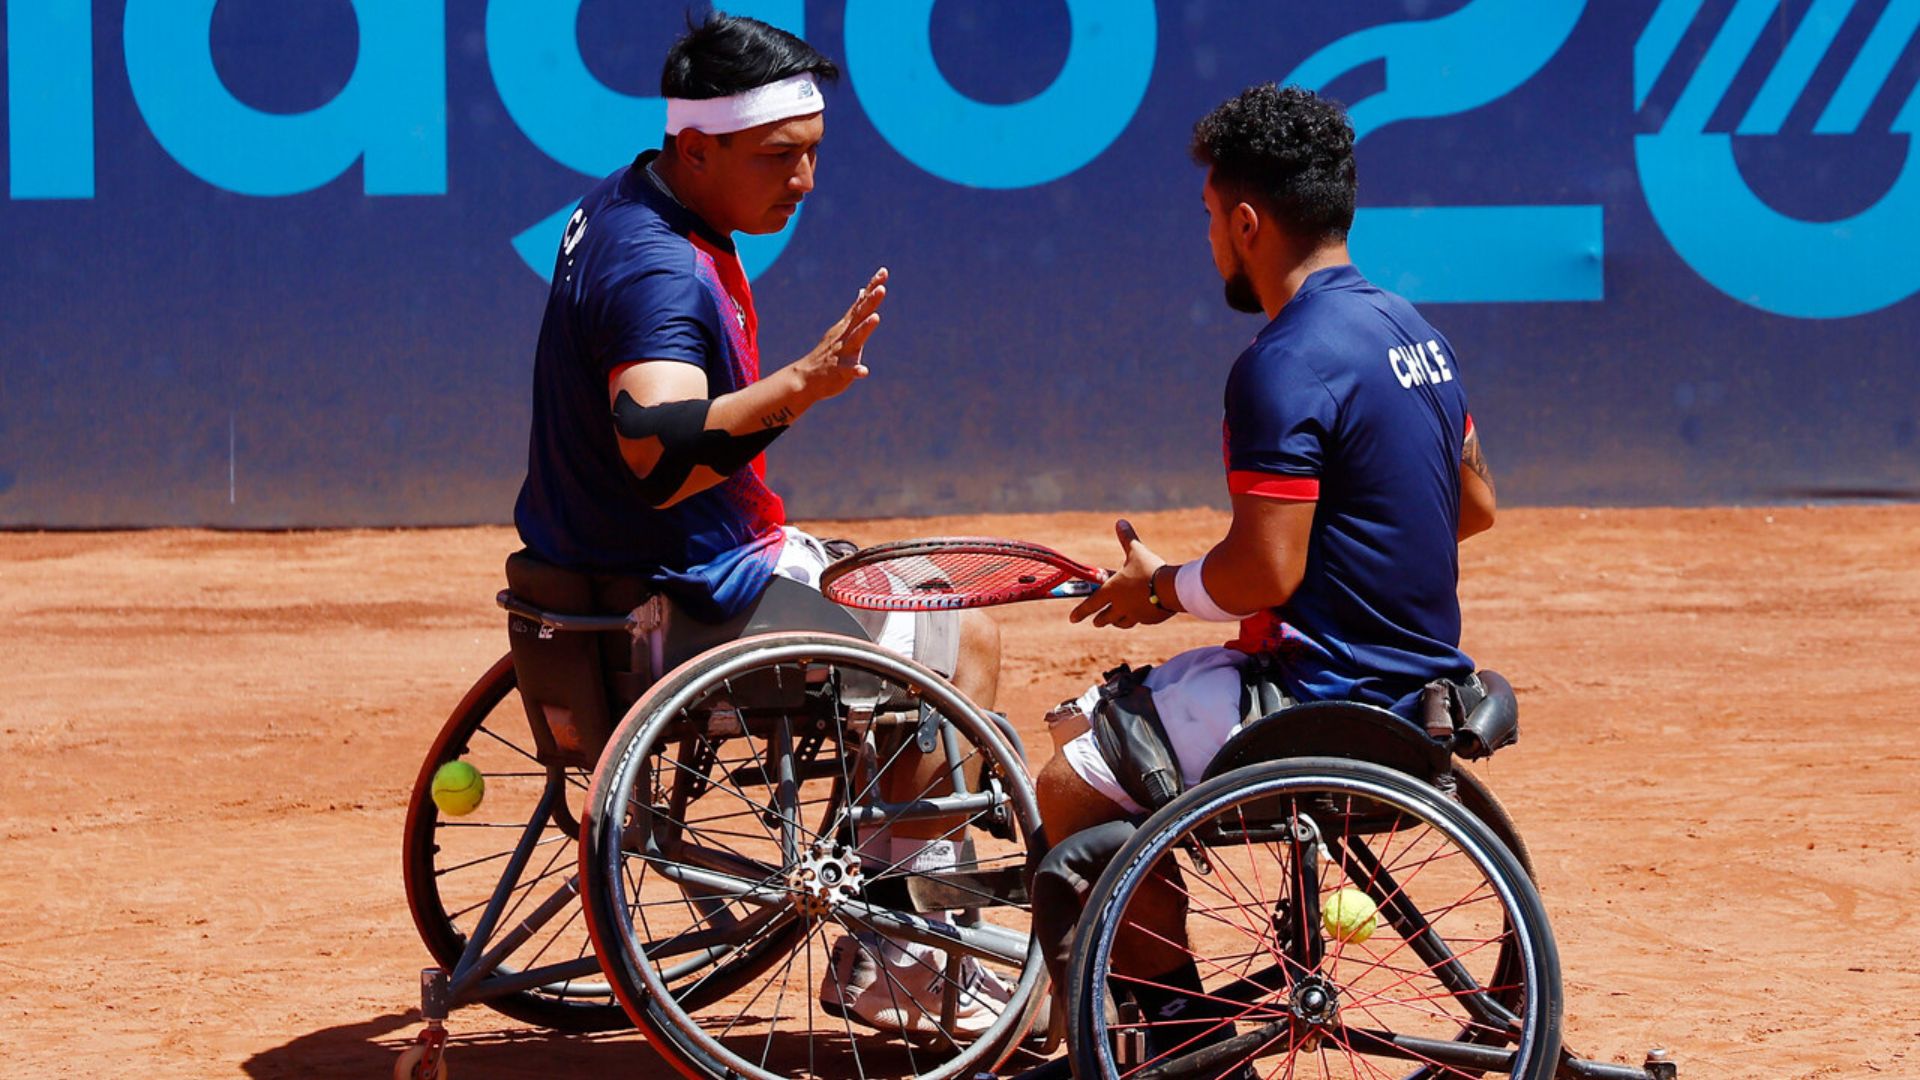 Chile Secures the Bronze in Wheelchair Tennis Doubles